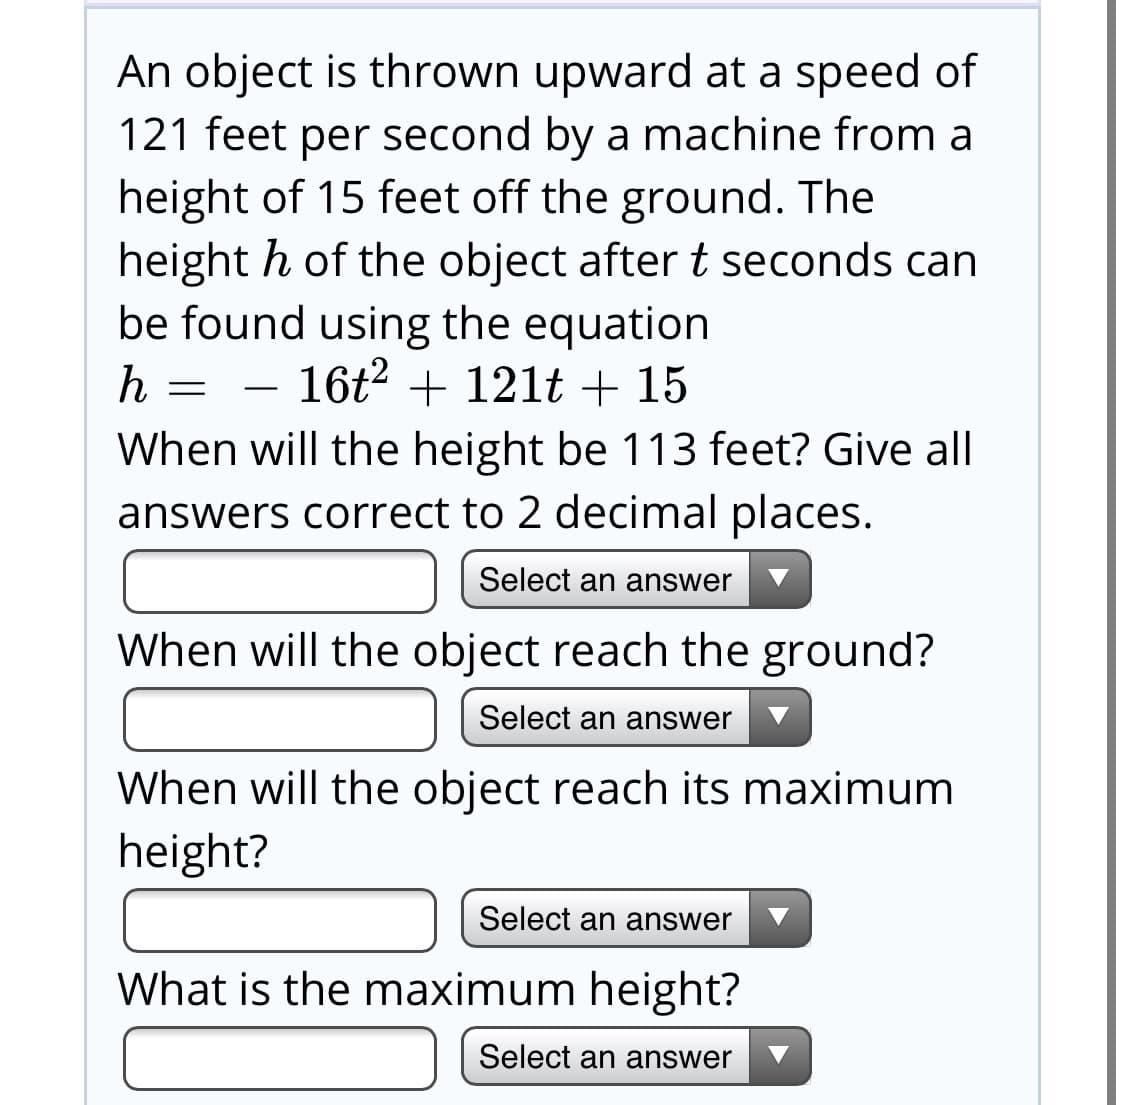 An object is thrown upward at a speed of
121 feet per second by a machine from a
height of 15 feet off the ground. The
height h of the object after t seconds can
be found using the equation
- 16t2 + 12lt + 15
When will the height be 113 feet? Give all
answers correct to 2 decimal places.
Select an answer
When will the object reach the ground?
Select an answer
When will the object reach its maximum
height?
Select an answer
What is the maximum height?
Select an answer
